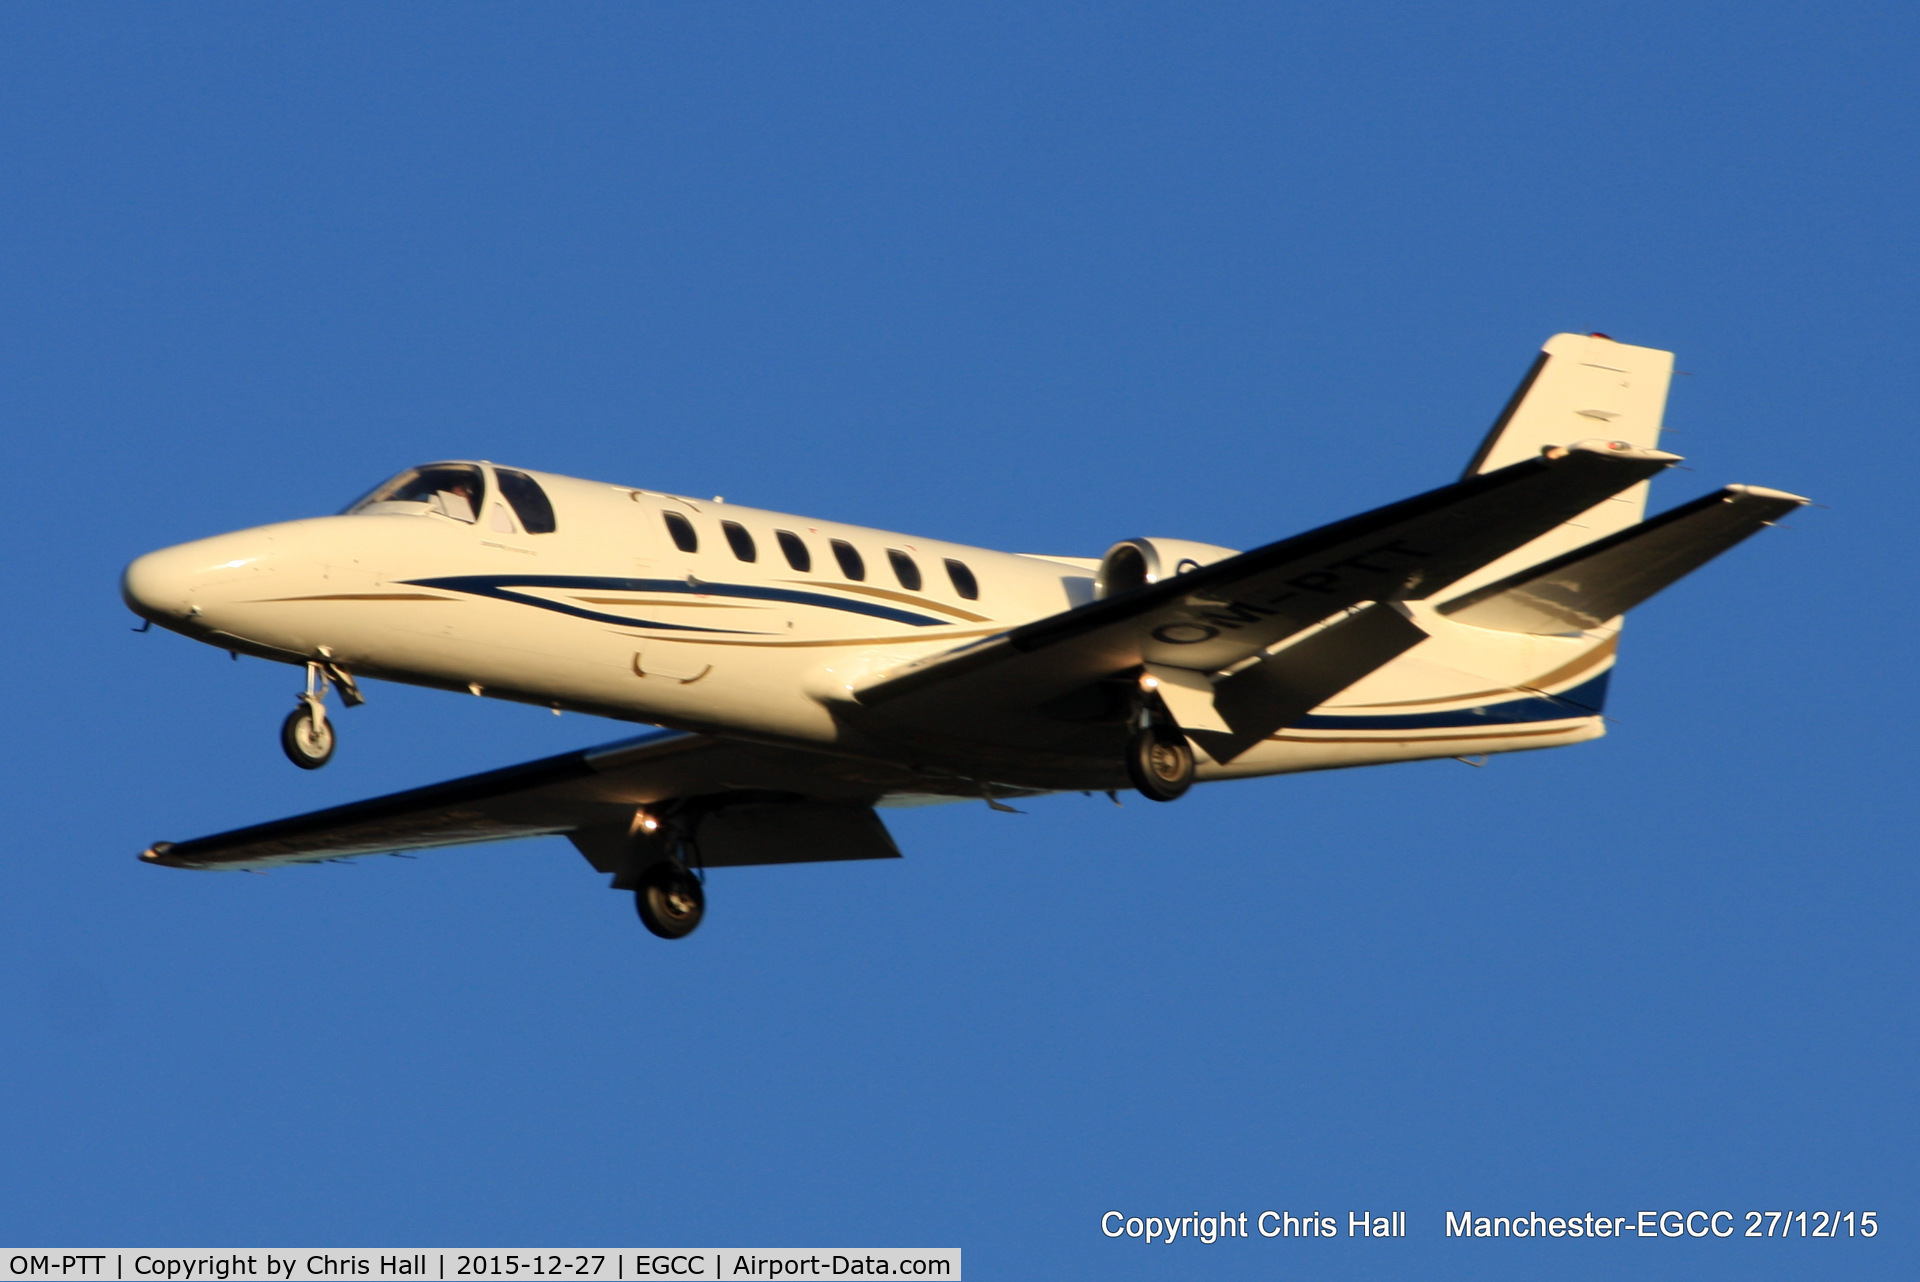 OM-PTT, 1982 Cessna 550 Citation II C/N 550-0324, on finals for RW23R at Manchester